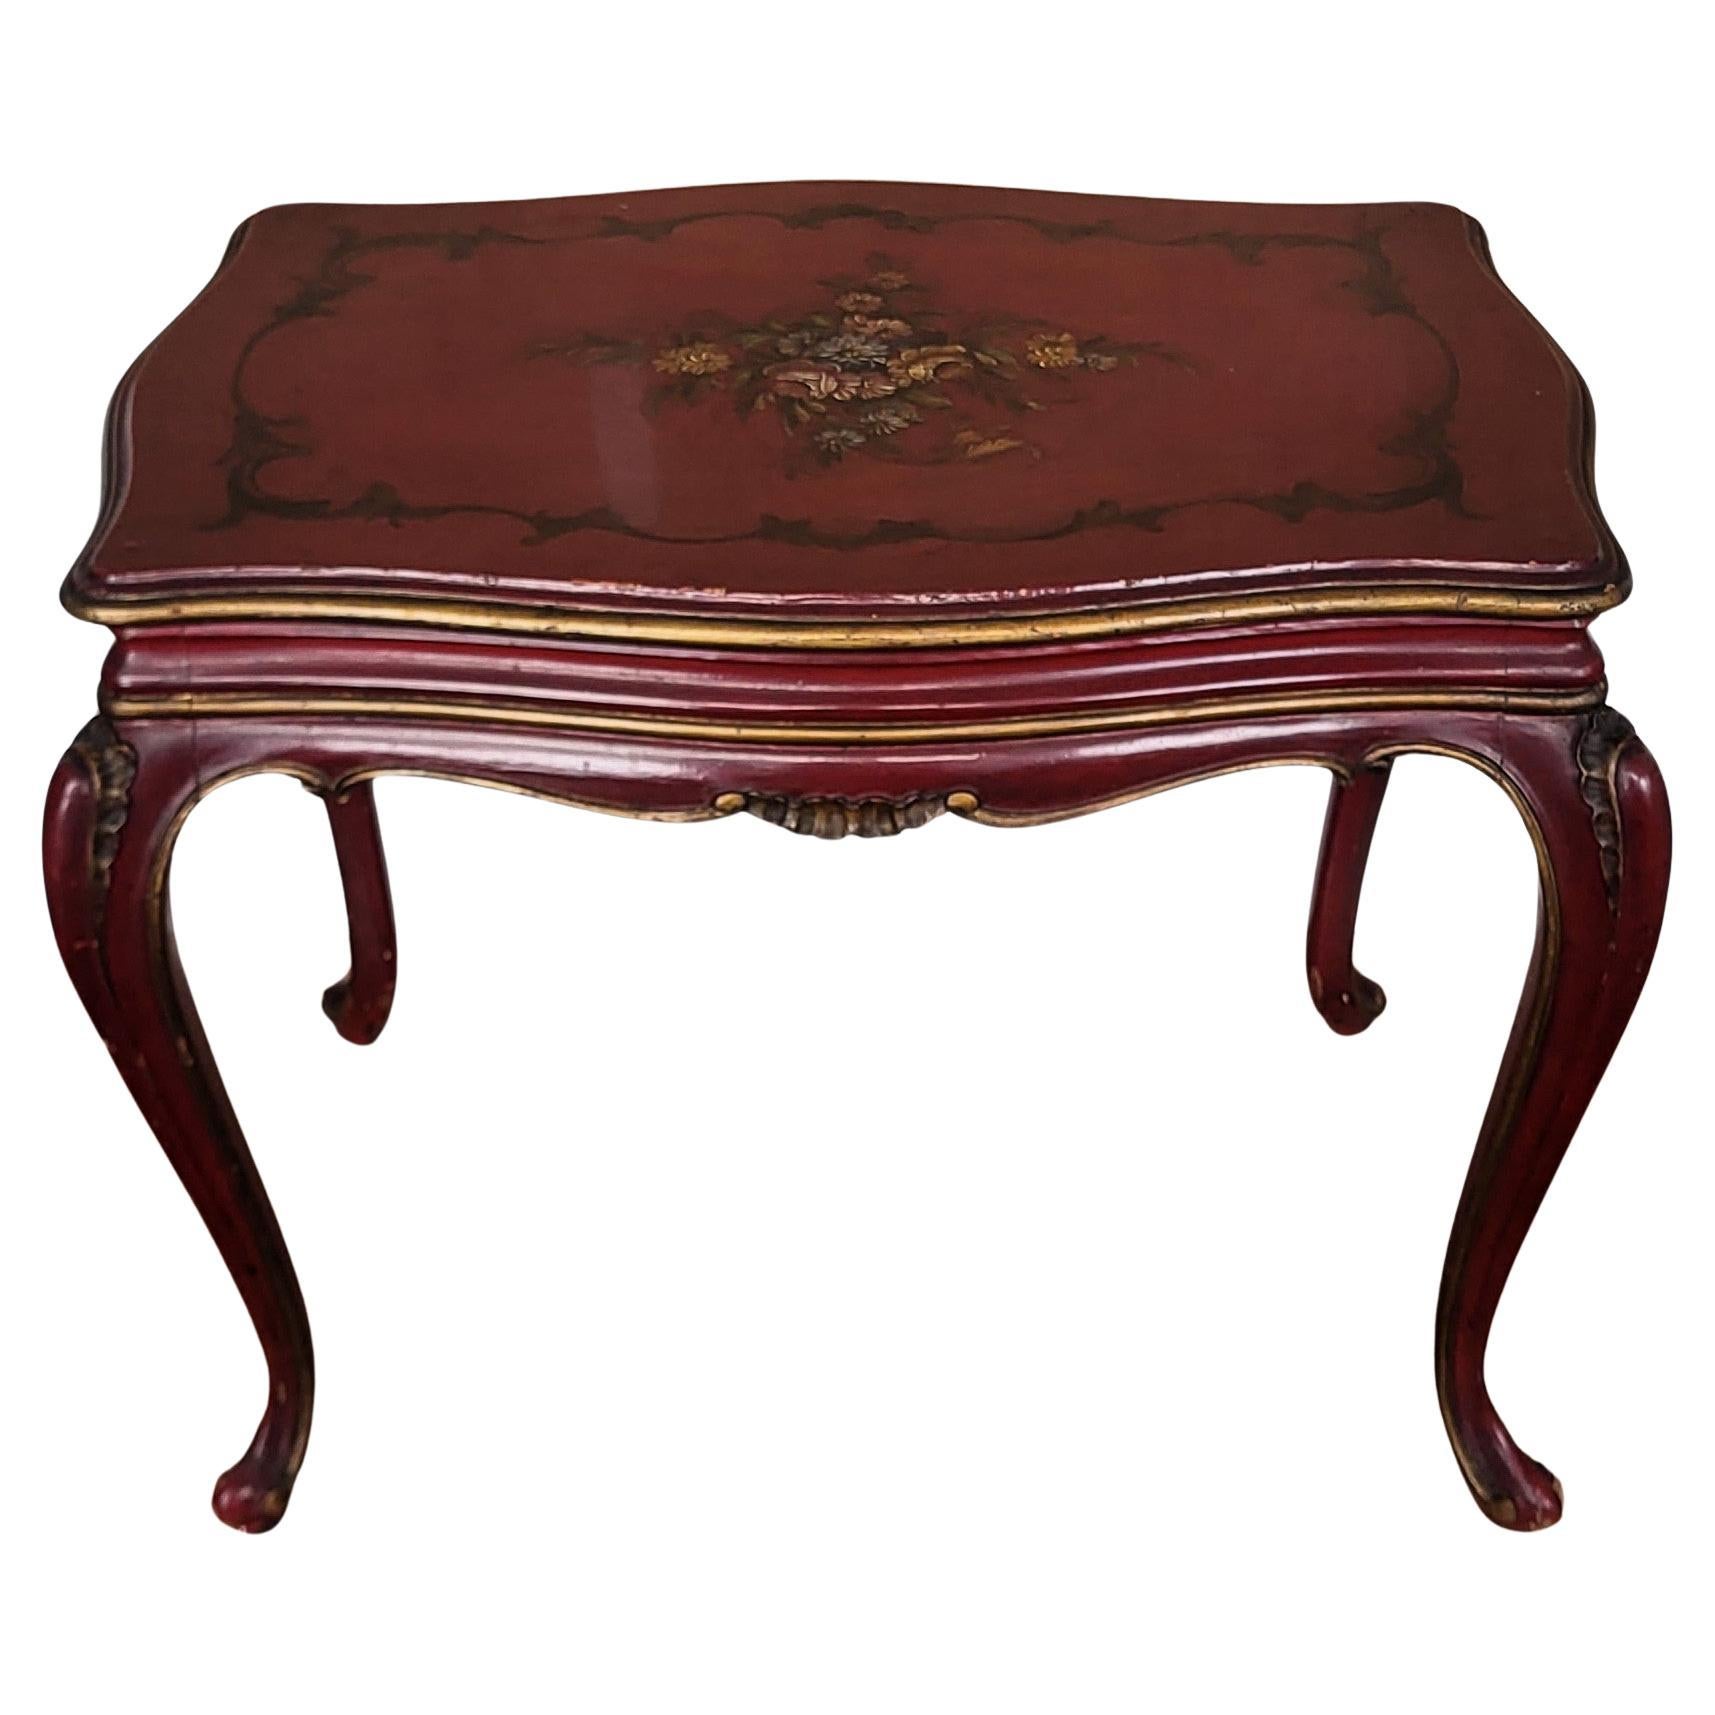 Neoclassical Italian Walnut Chinoiserie Red Bordeaux Sofa Table or Side Table For Sale